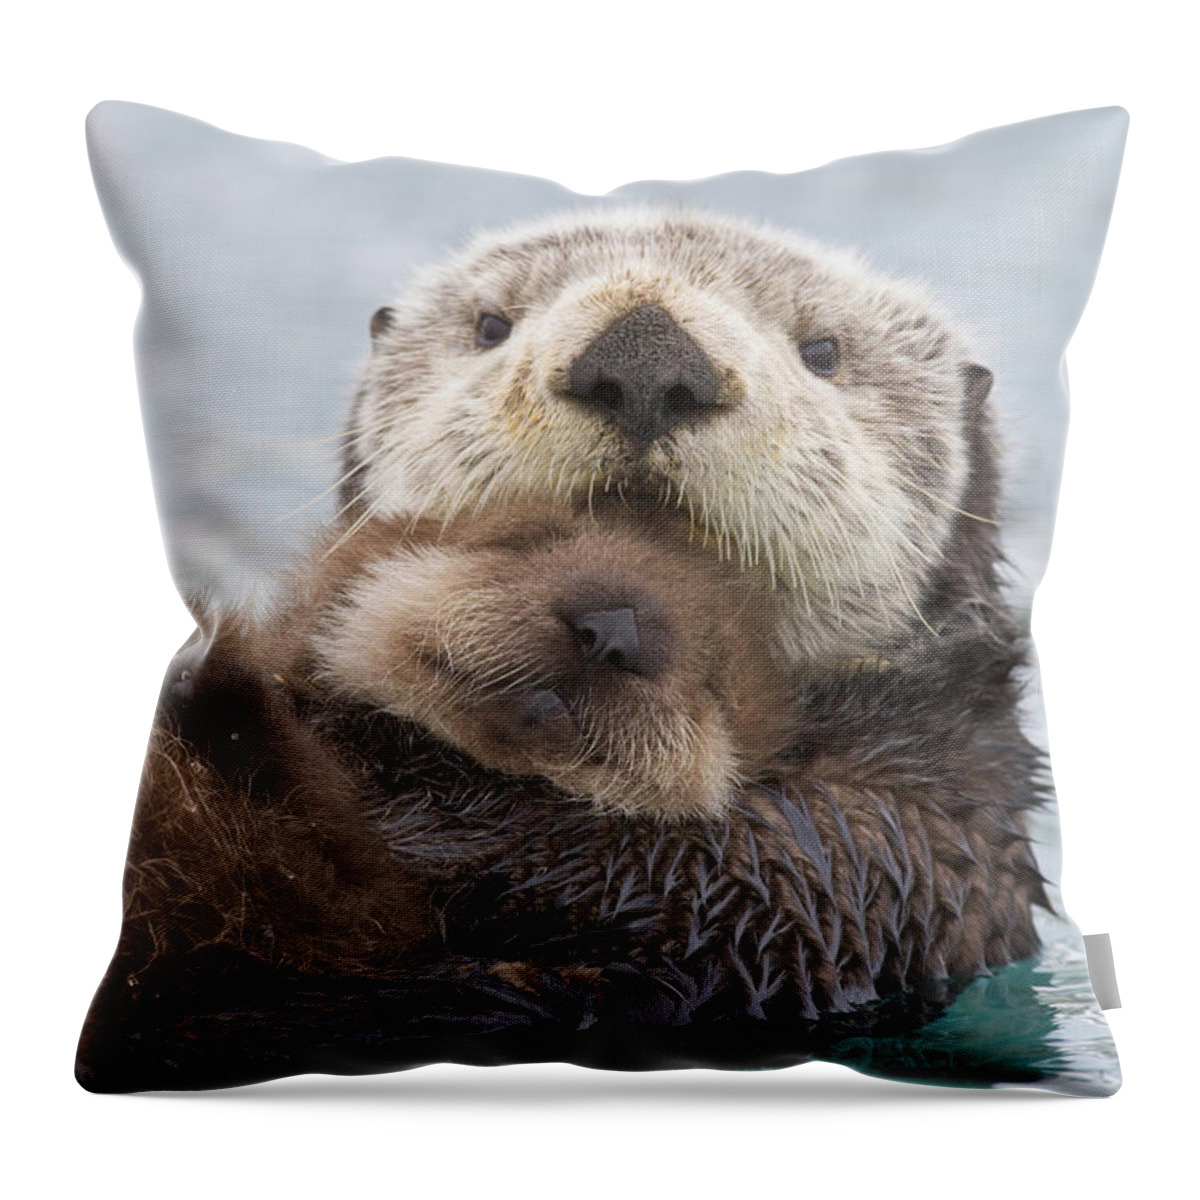 #faatoppicks Throw Pillow featuring the photograph Female Sea Otter Holding Newborn Pup #2 by Milo Burcham